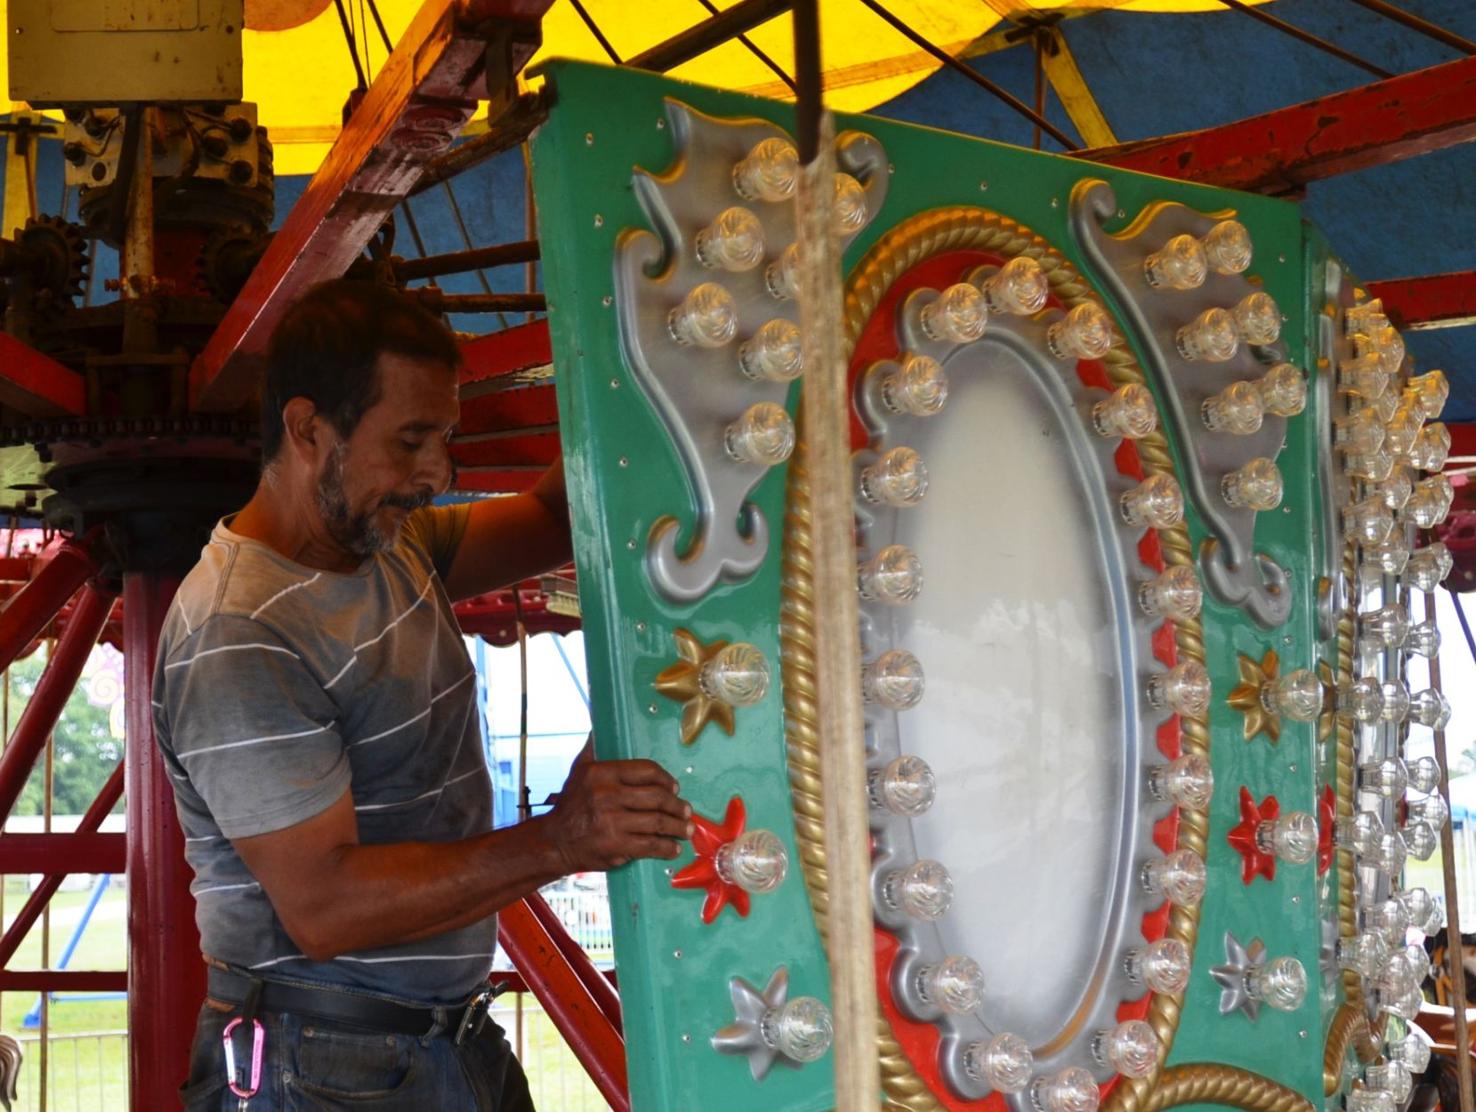 PHOTOS Setup continues for the Iredell County Fair